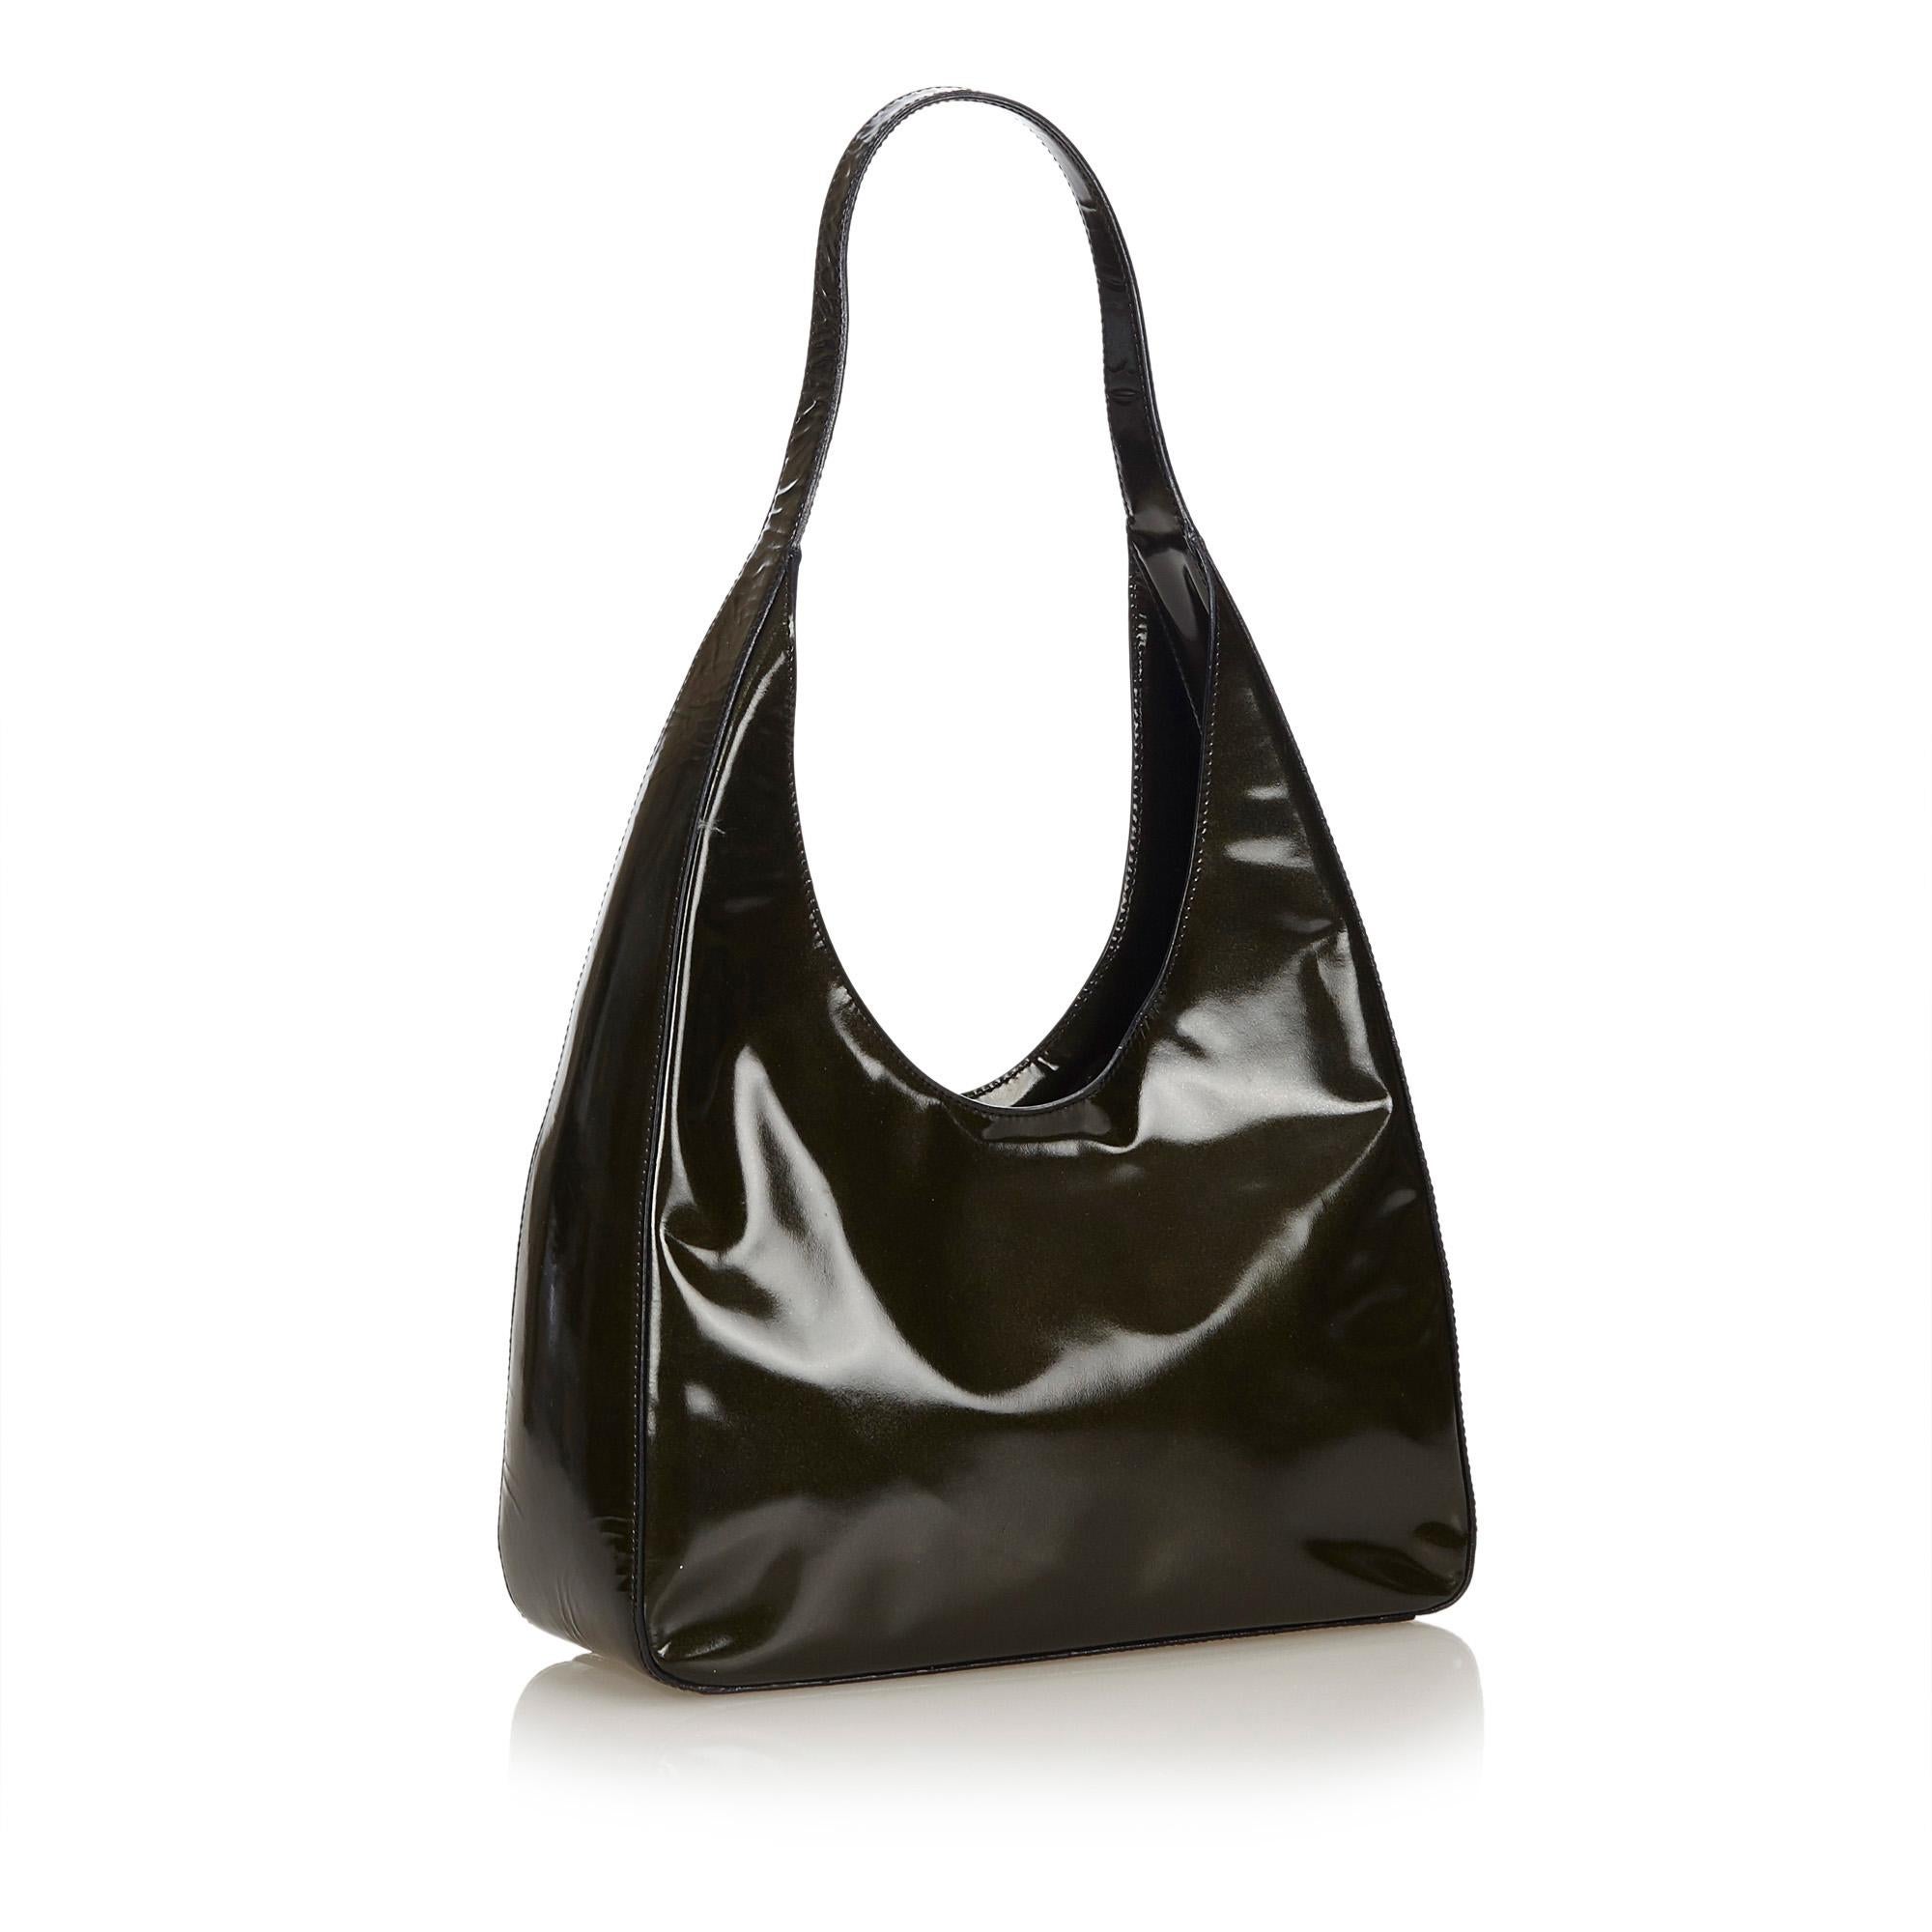 This shoulder bag features a patent leather body, flat strap, open top and interior zip pocket. It carries as B+ condition rating.

Inclusions: 
Dust Bag

Dimensions:
Length: 27.00 cm
Width: 29.00 cm
Depth: 9.00 cm
Shoulder Drop: 29.00 cm

Material: